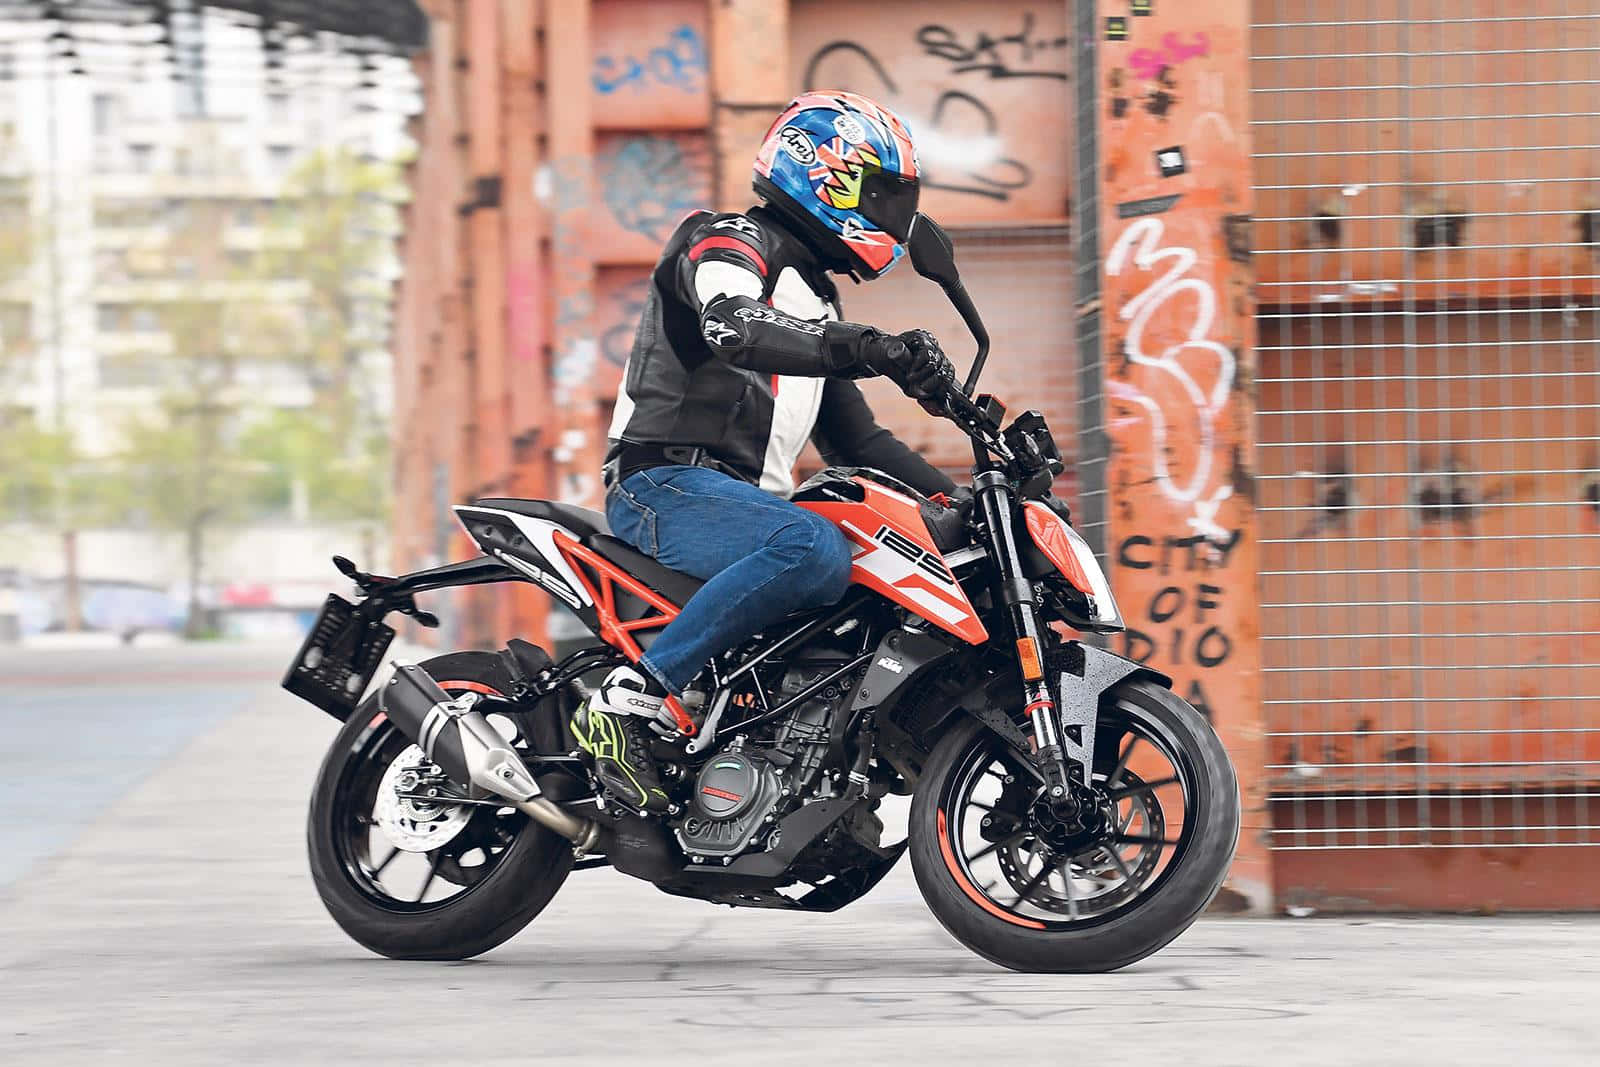 Enjoy The Thrill of the Ride with the KTM Duke